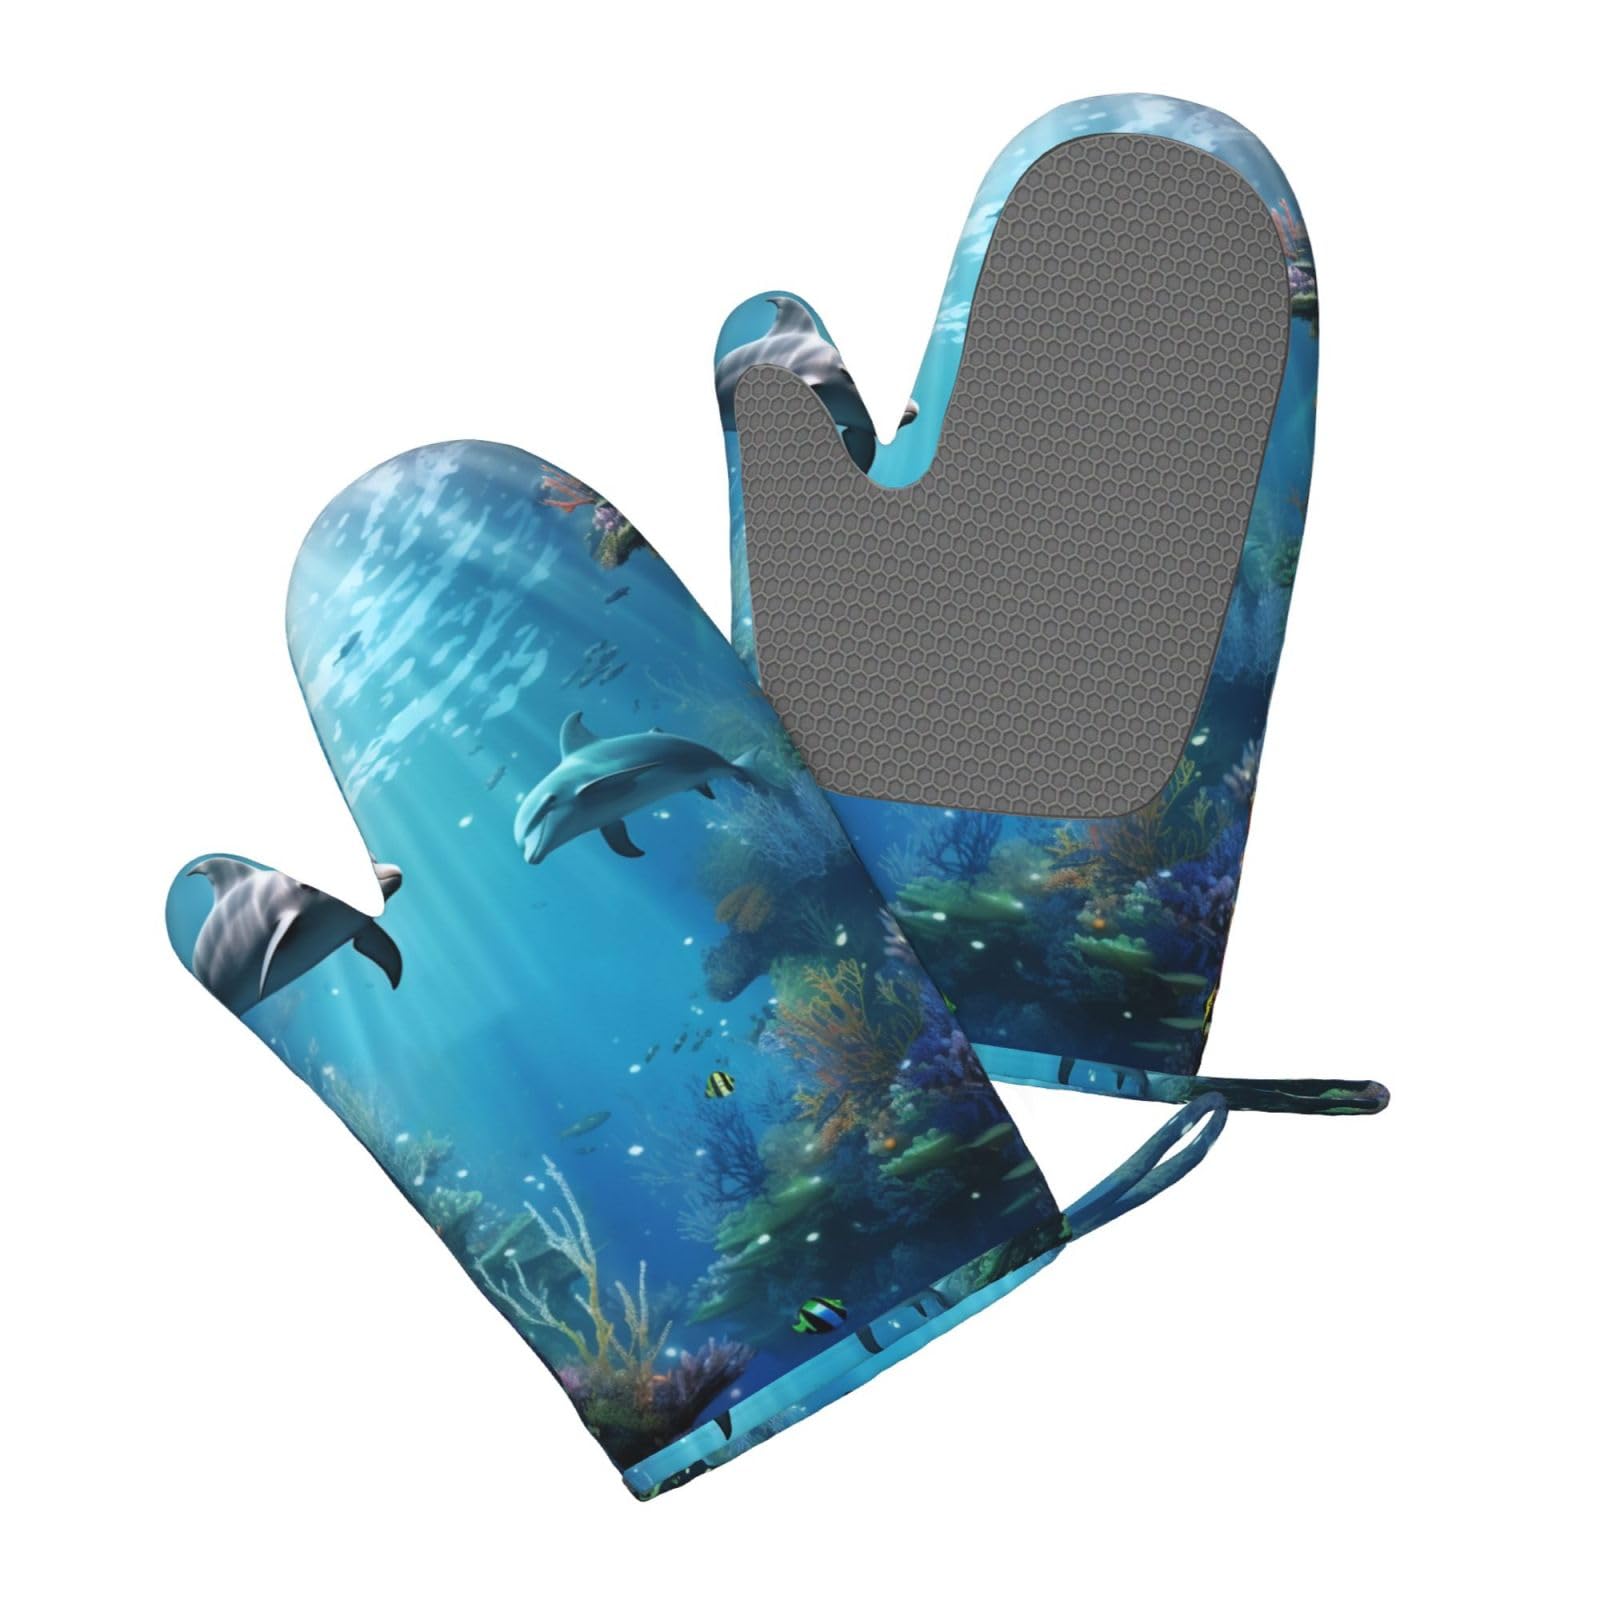 Blue Ocean Underwater Fish Printed Oven Mitts Heat Resistant Oven Gloves Non-Slip Silicone Kitchen Gloves for Cooking Baking BBQ Gloves 1 Pair